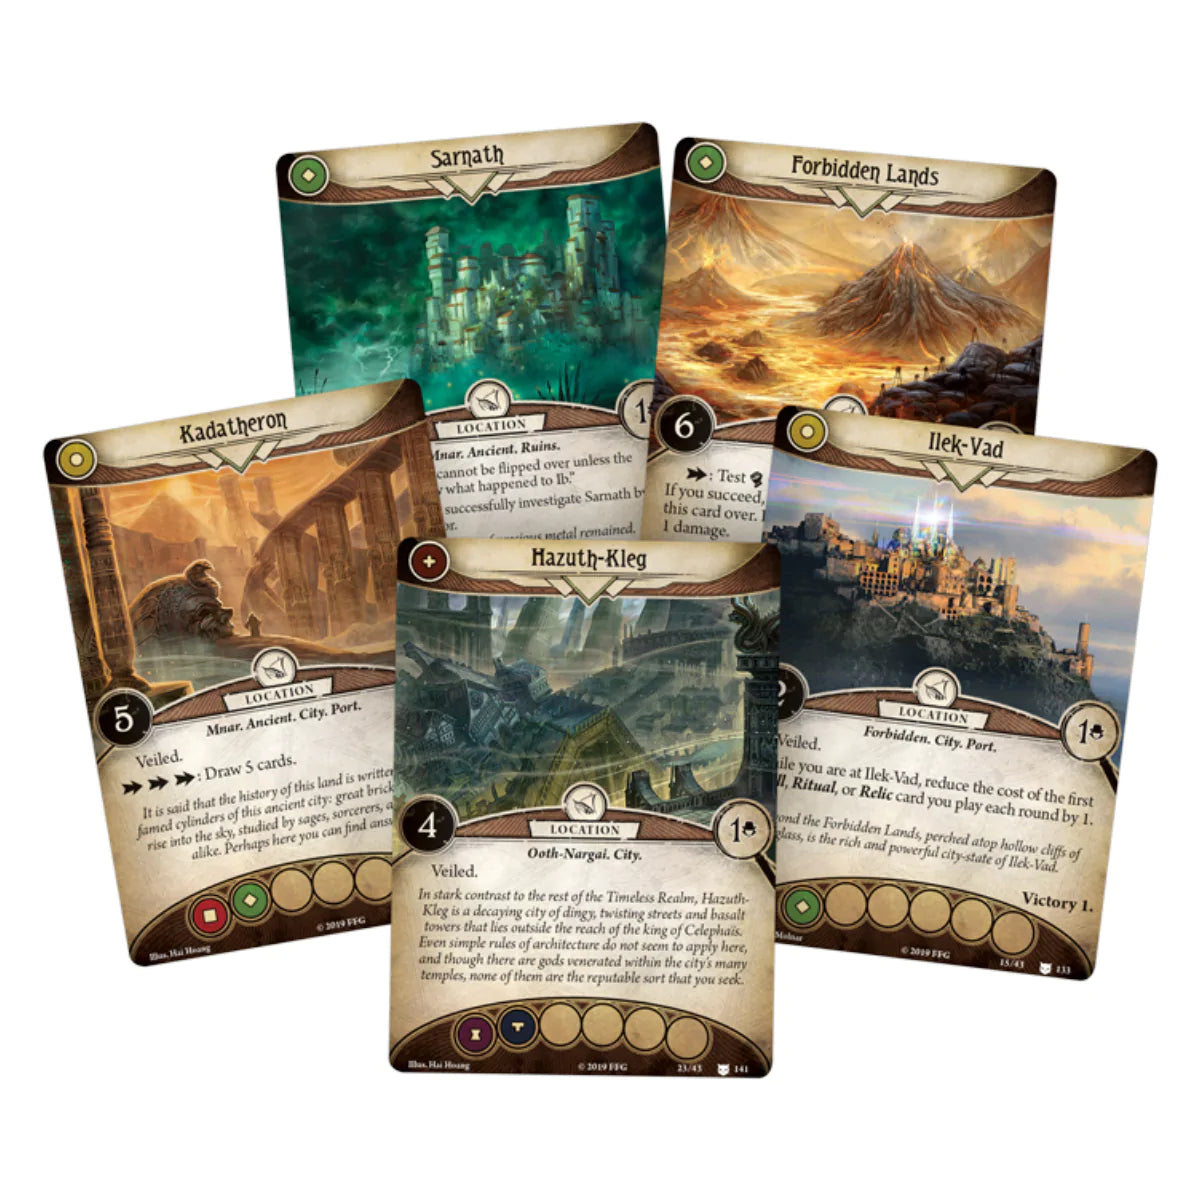 Arkham Horror: The Card Game - The Search for Kadath: Mythos Pack